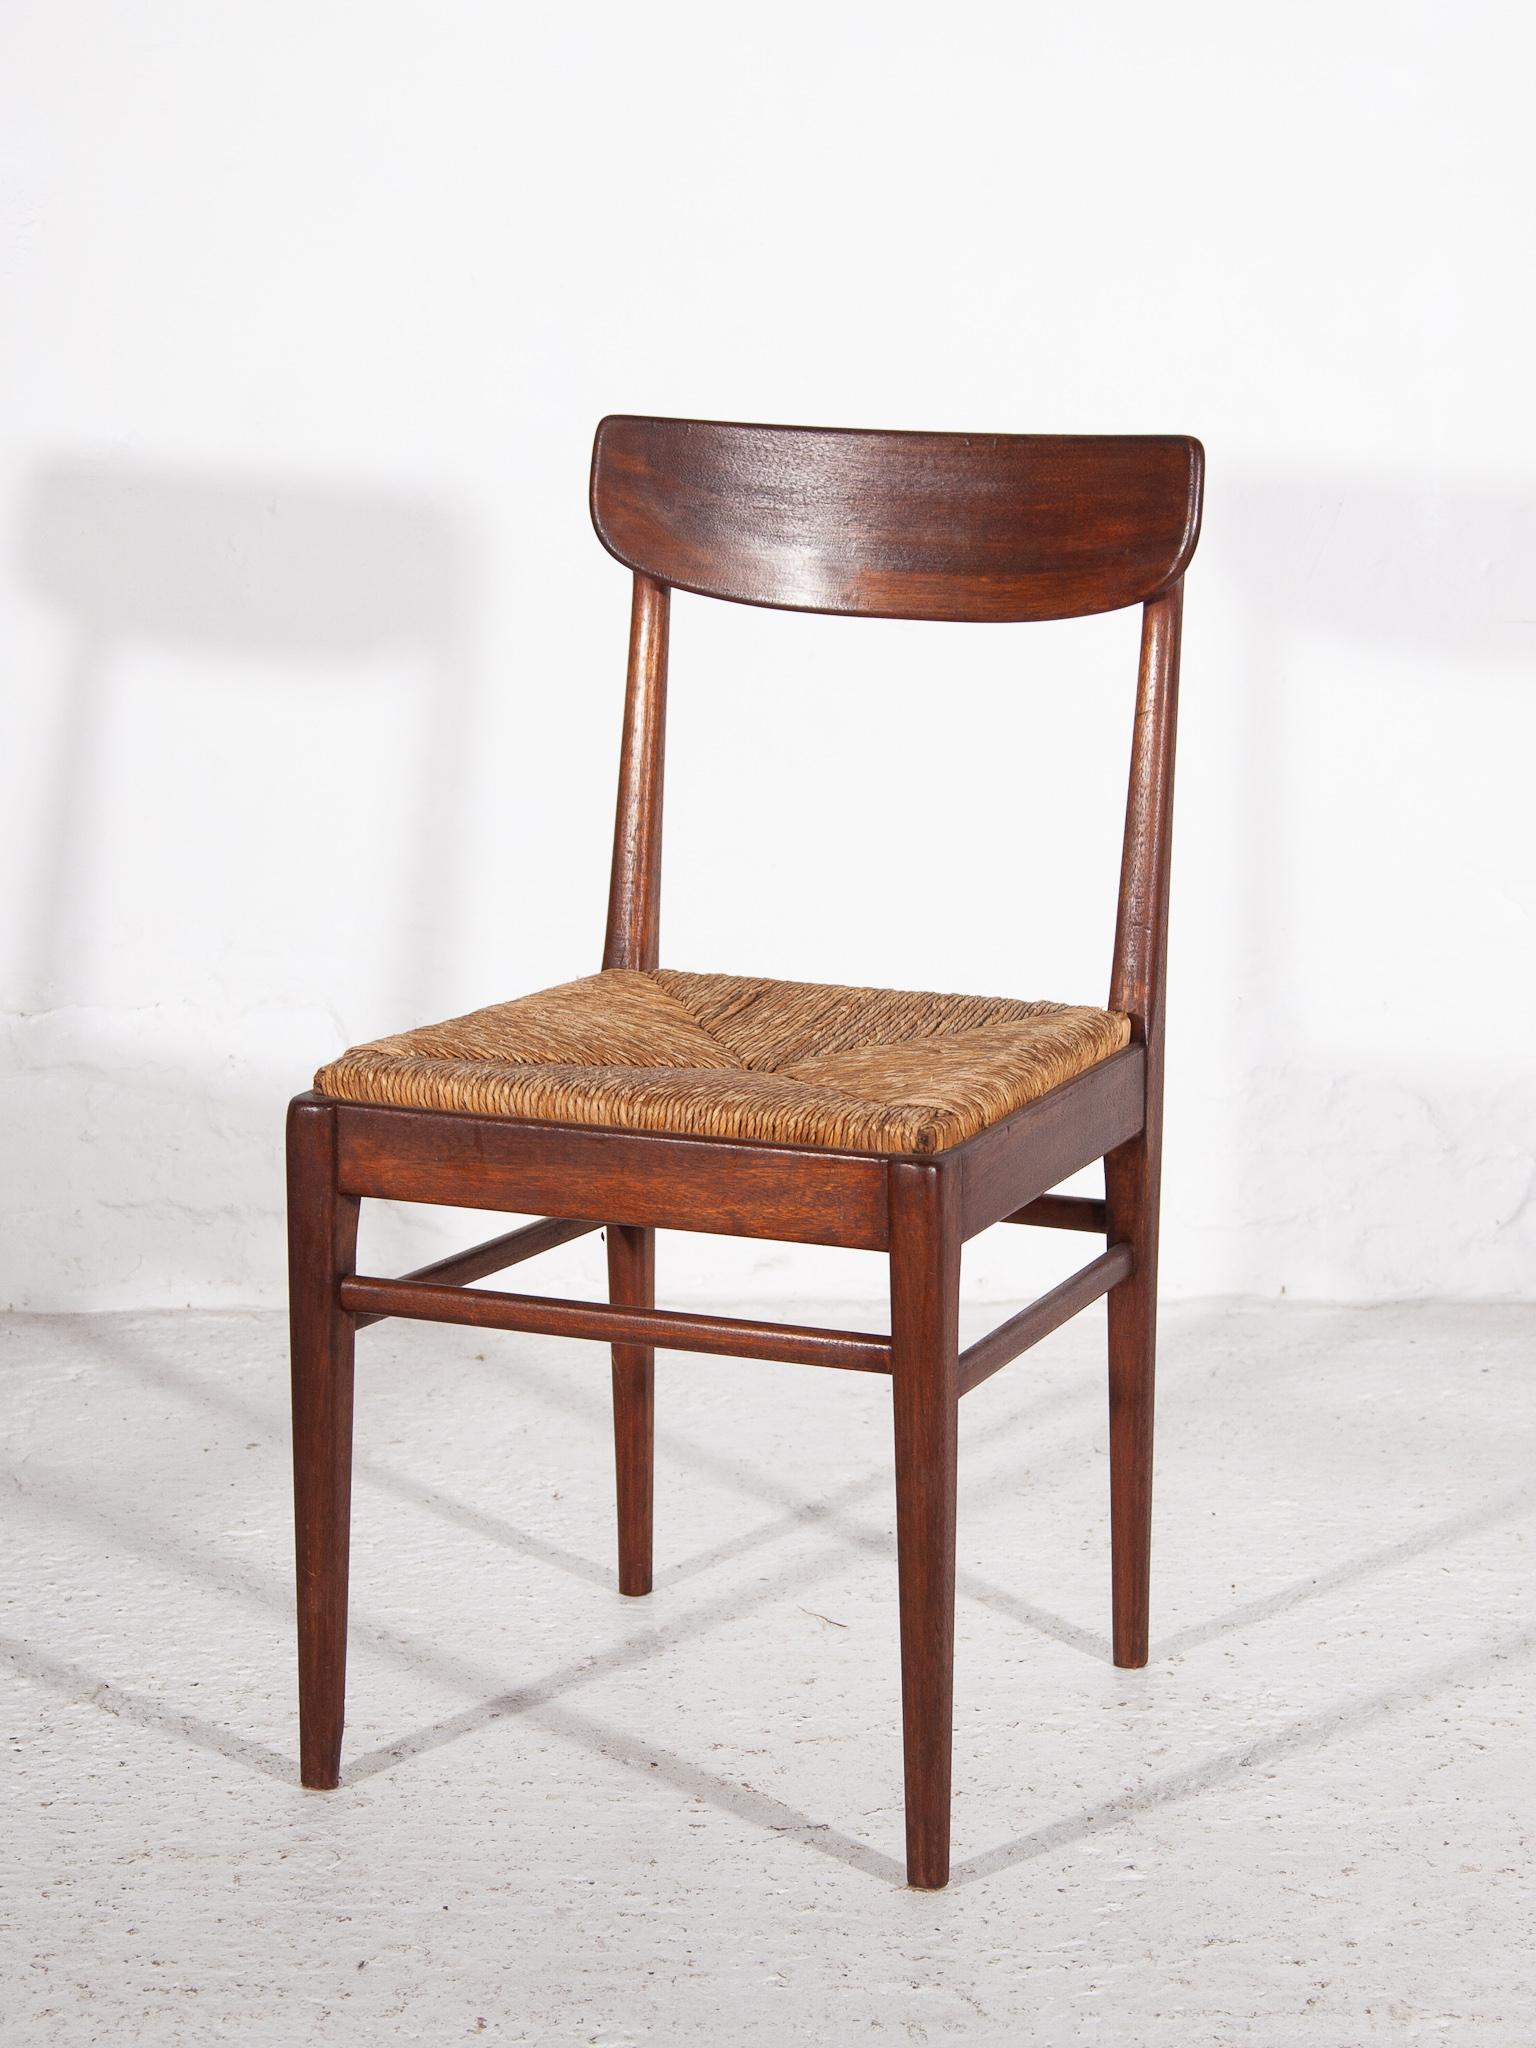 Mid-Century Modern Teak Dining Chairs with Rattan Sea, t 1959, Belgium For Sale